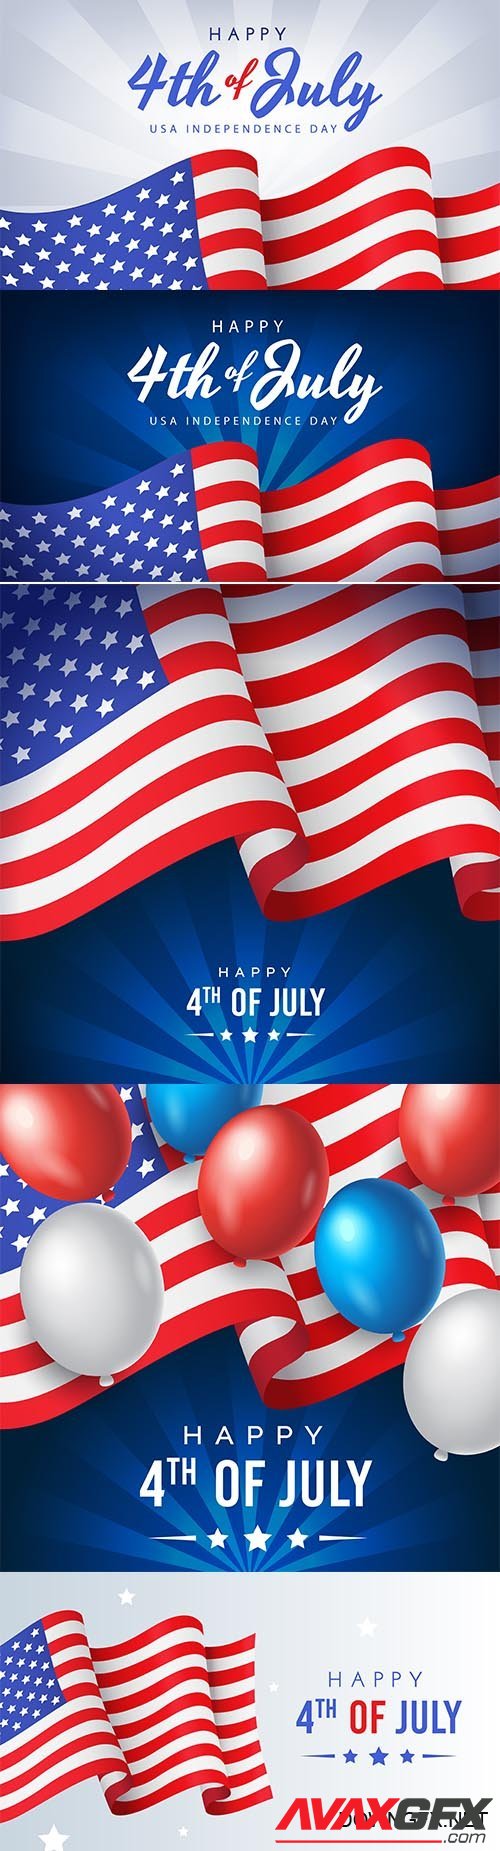 US Independence Day Background